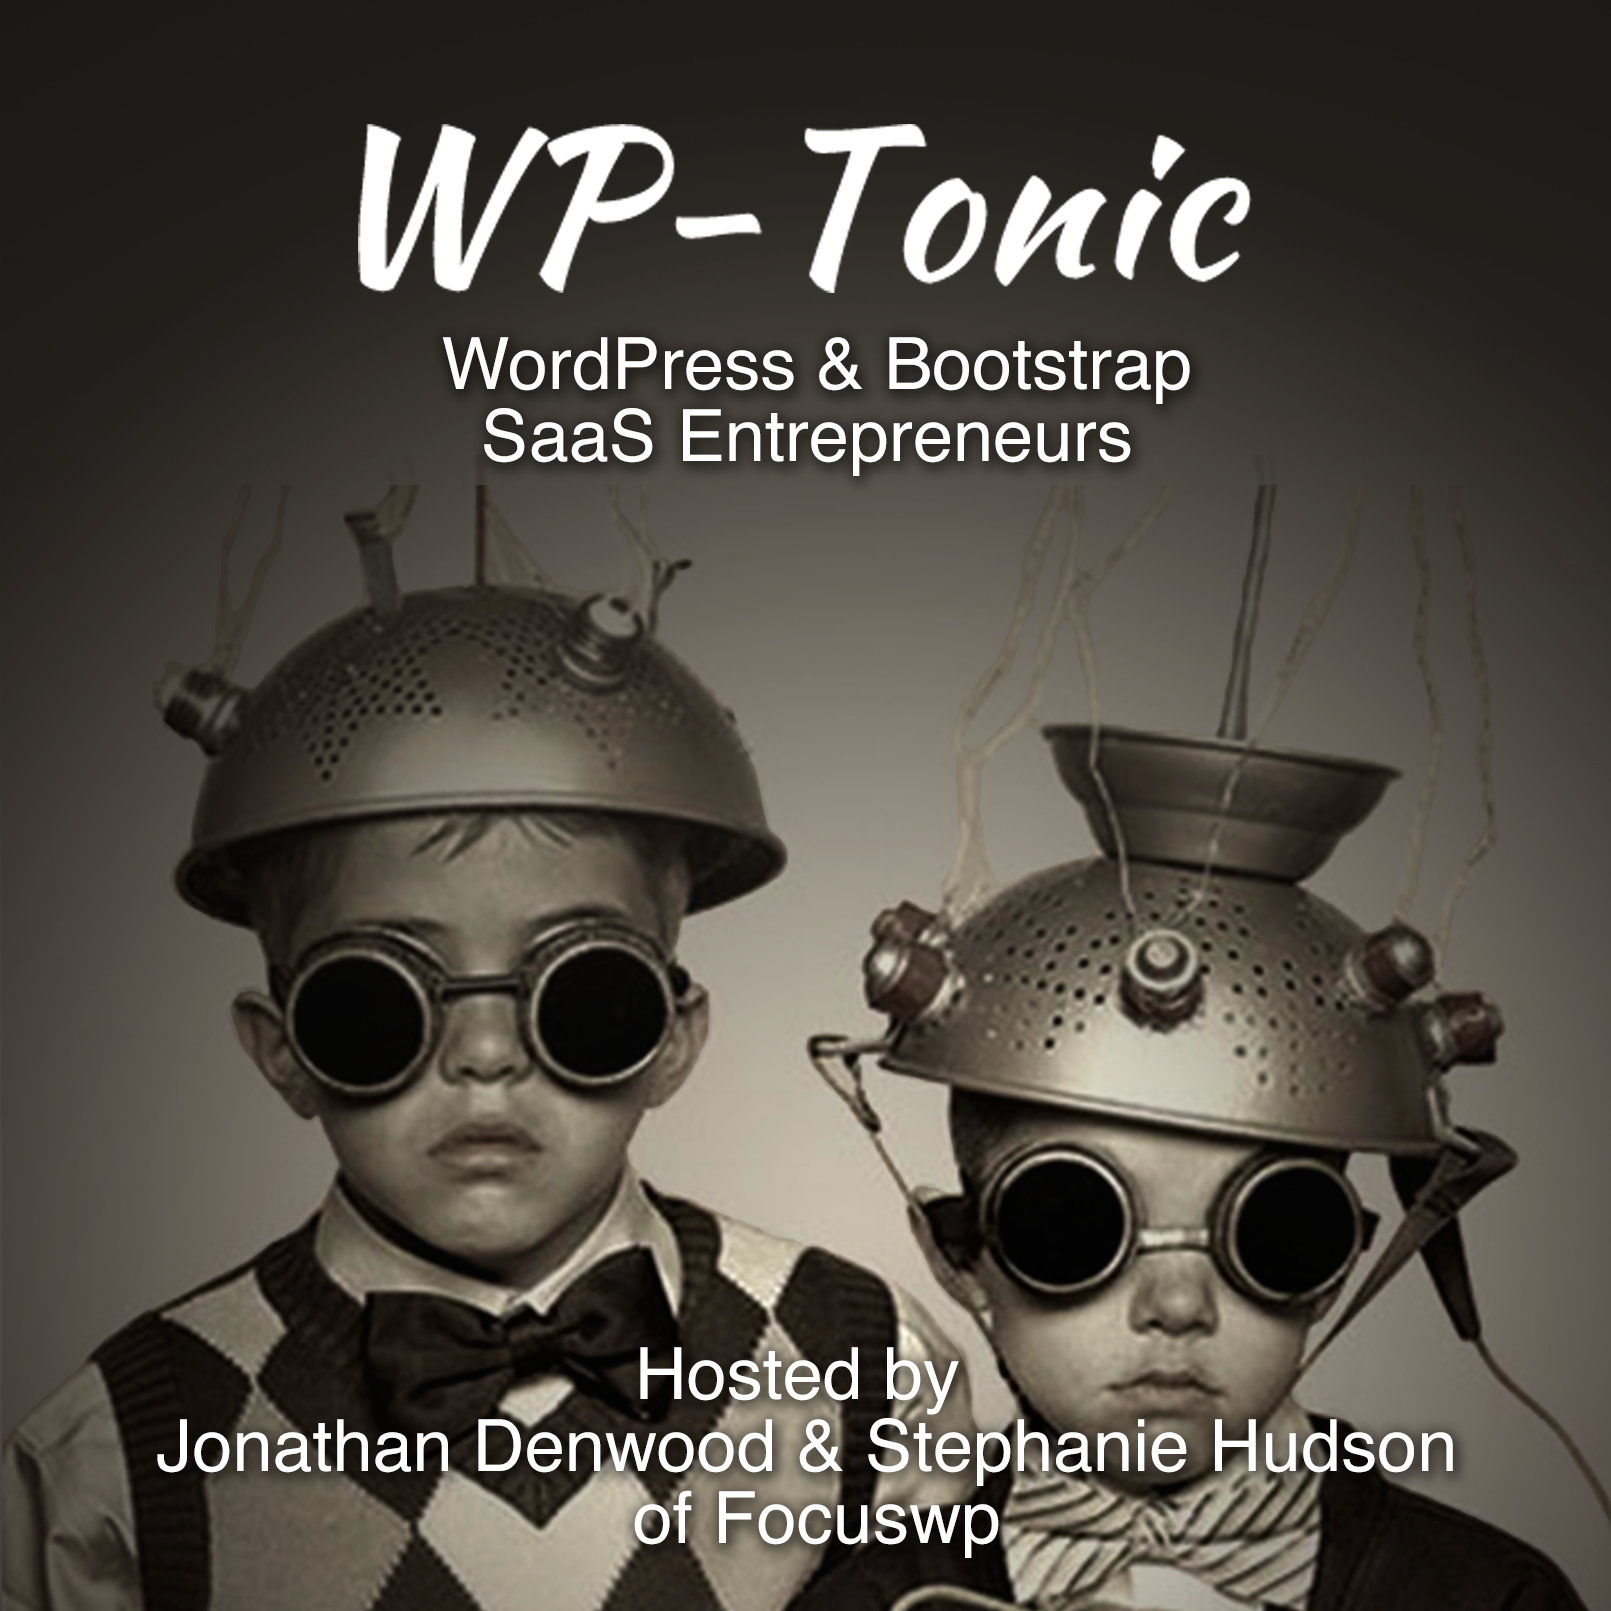 #513 WP-Tonic Round-Table Show on Friday, July the 17th, 2020 at 8:30 am PST